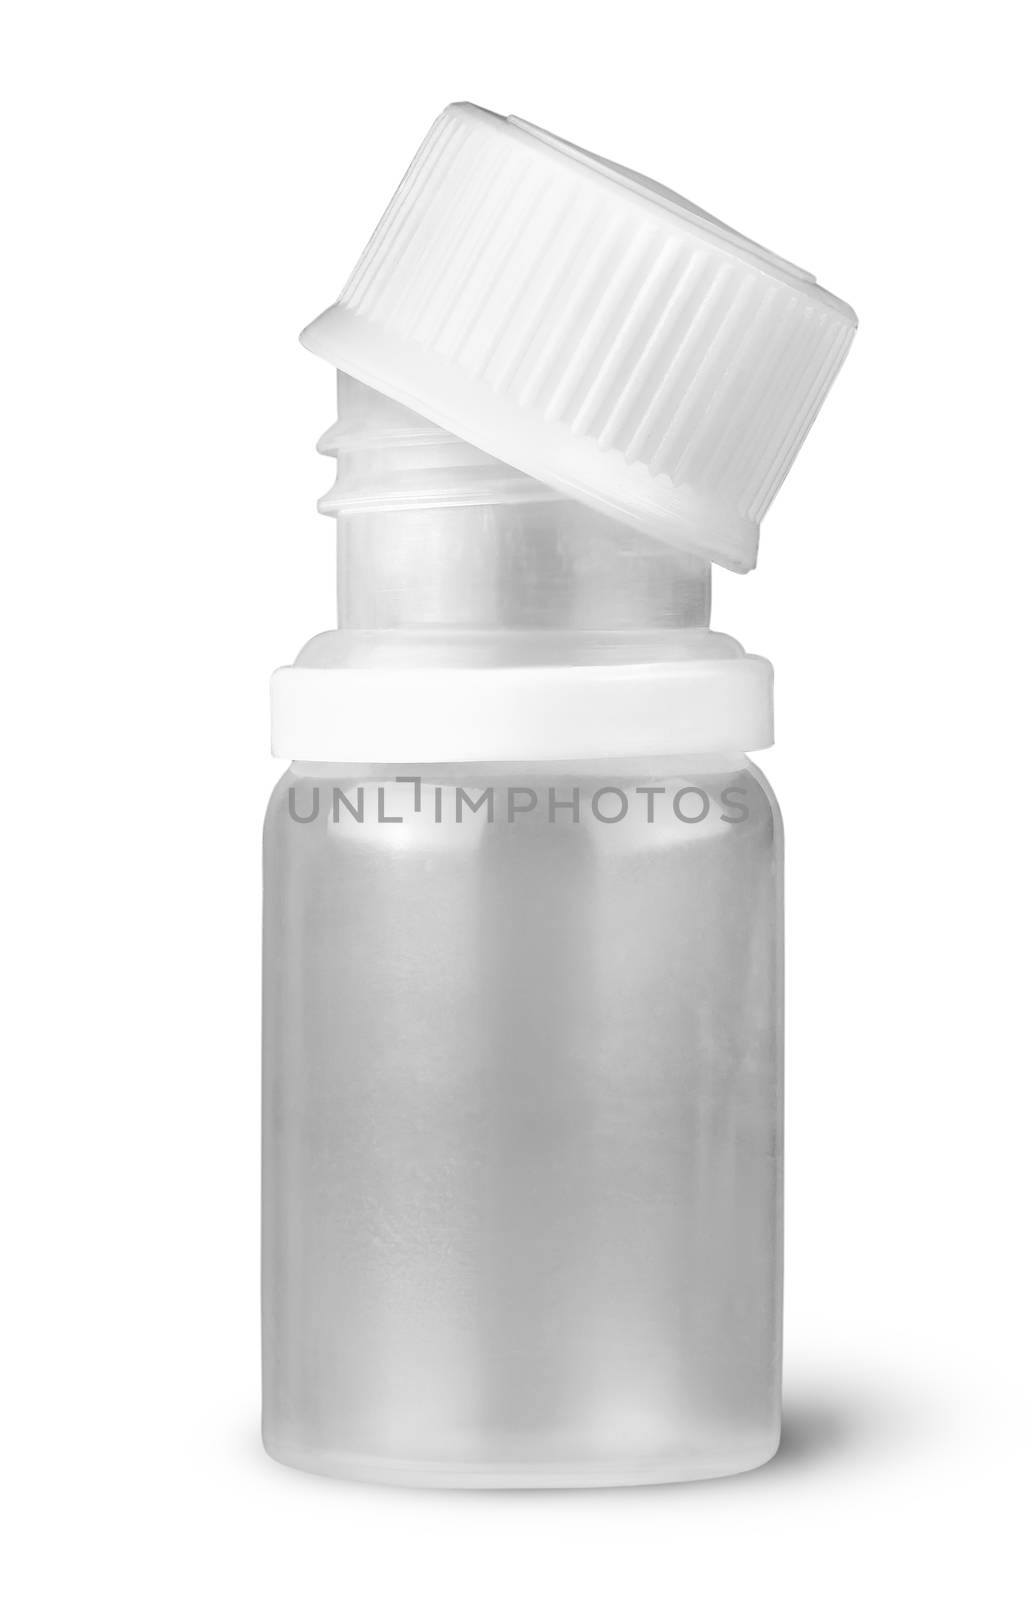 Small plastic bottle with lid removed by Cipariss